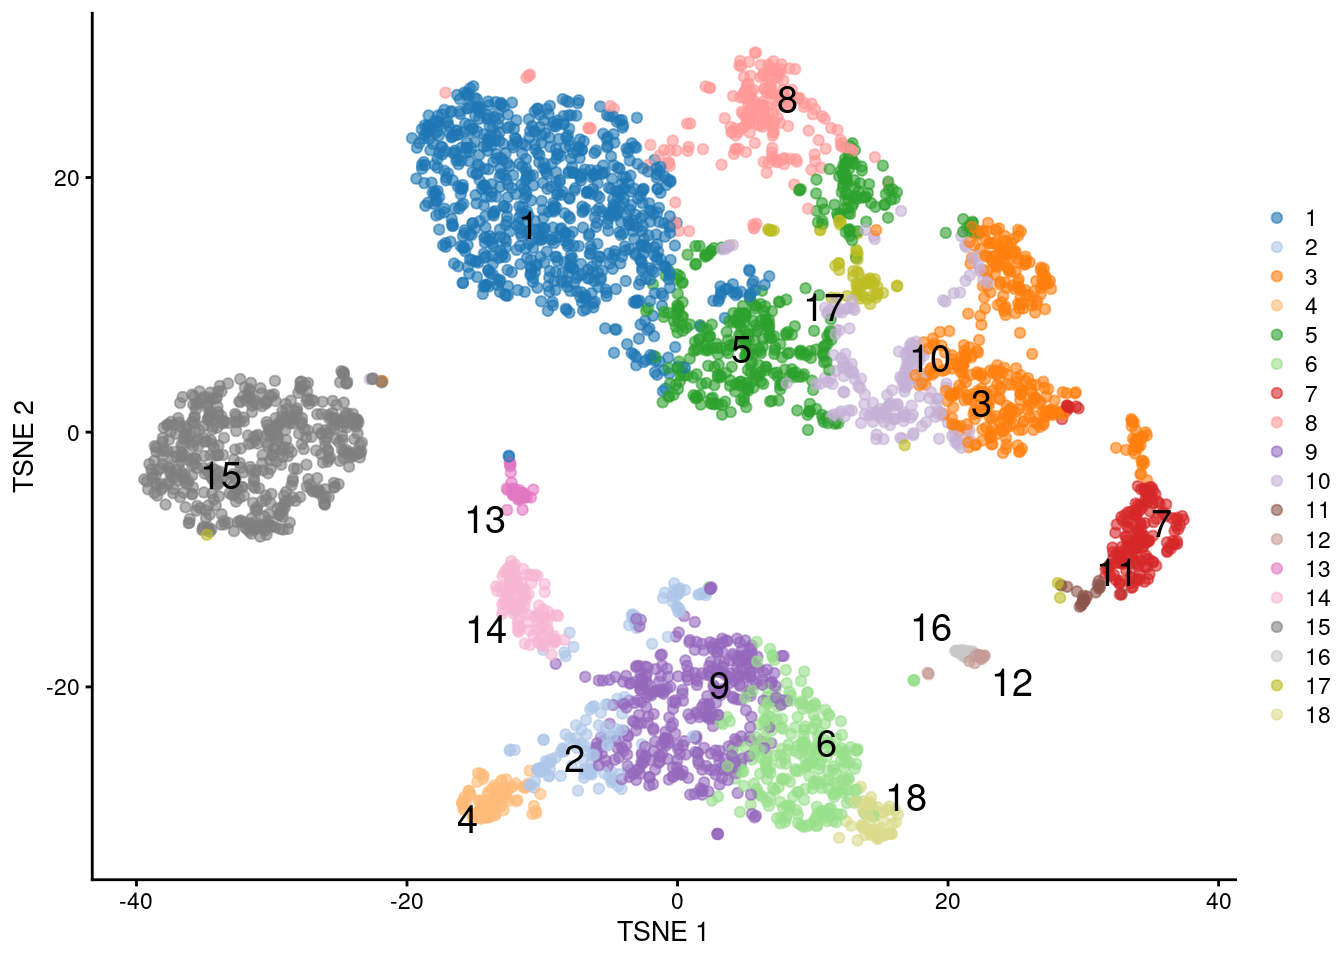 $t$-SNE plot of the PBMC dataset, where each point represents a cell and is coloured according to the identity of the assigned cluster from combined $k$-means/affinity propagation clustering.